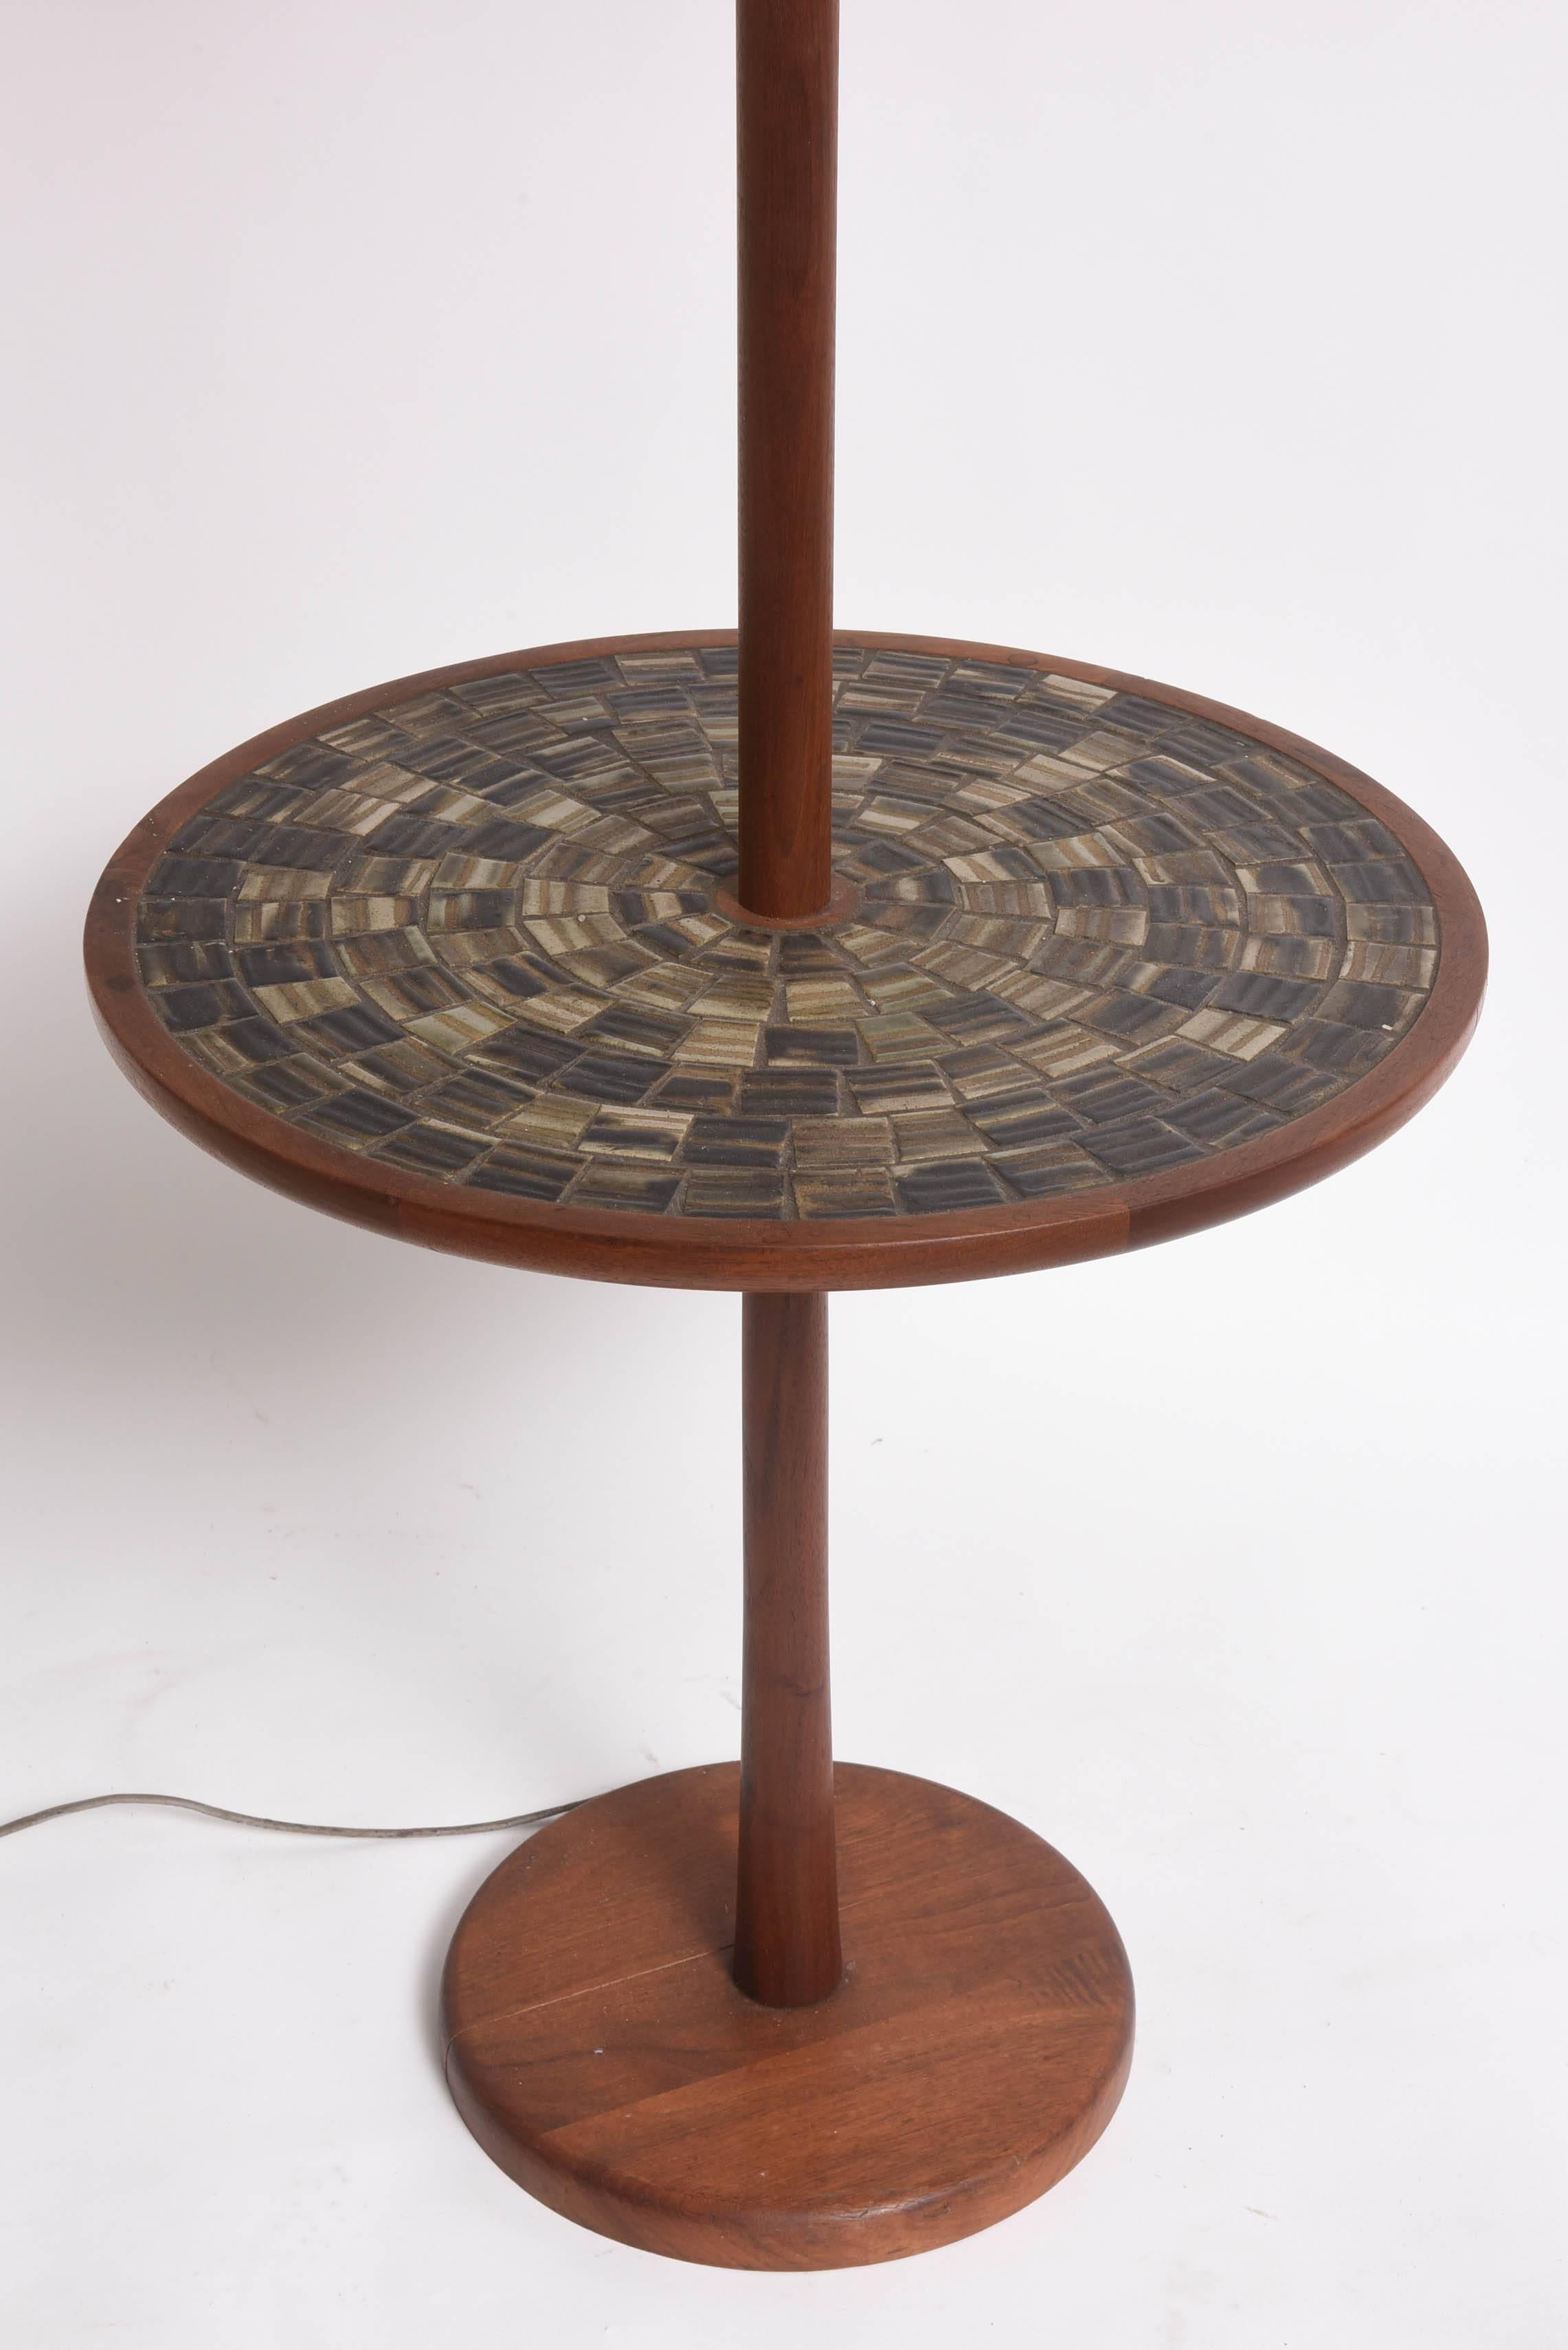 Solid walnut construction. Radiating ceramic table table surface and interwoven shade with walnut finial. Wiring is original and in working order.
Table ht.- 20